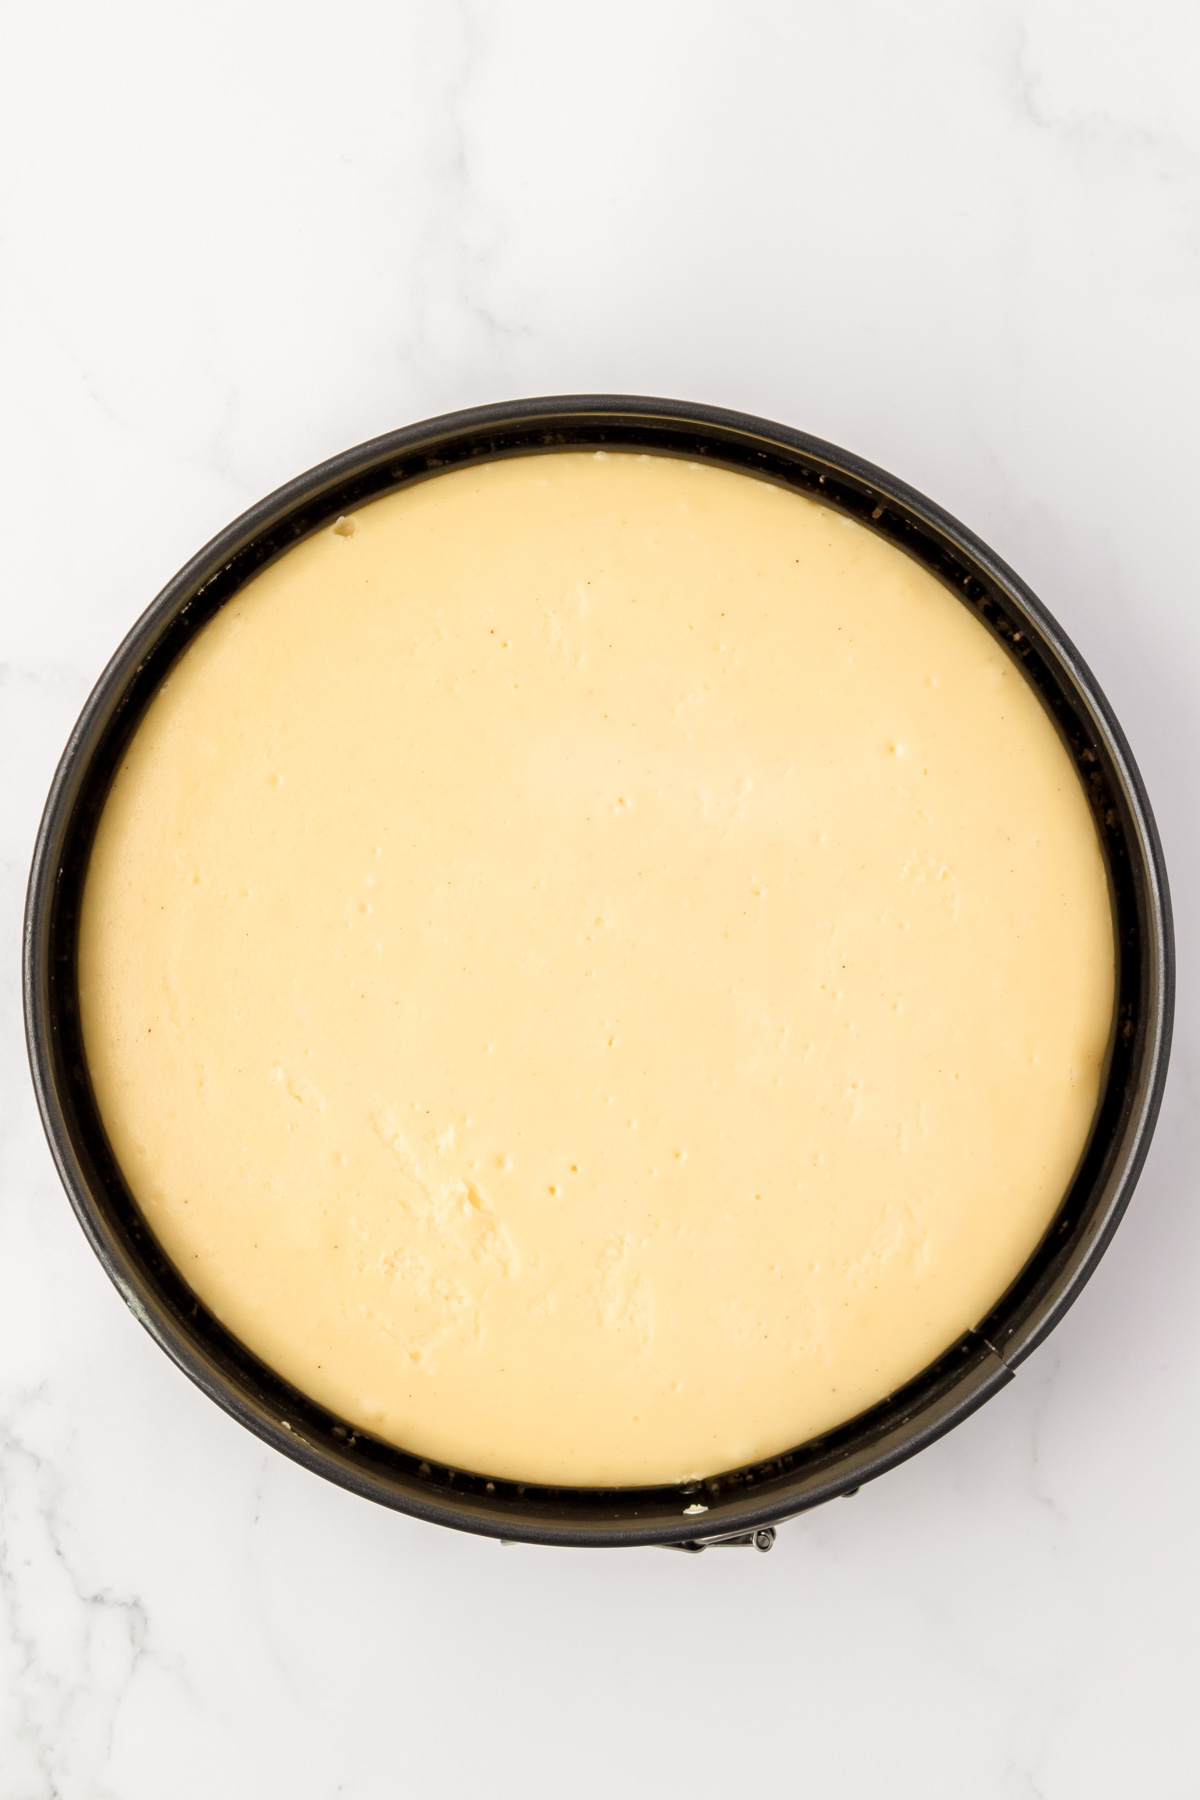 Overhead photo of a baked cheesecake.